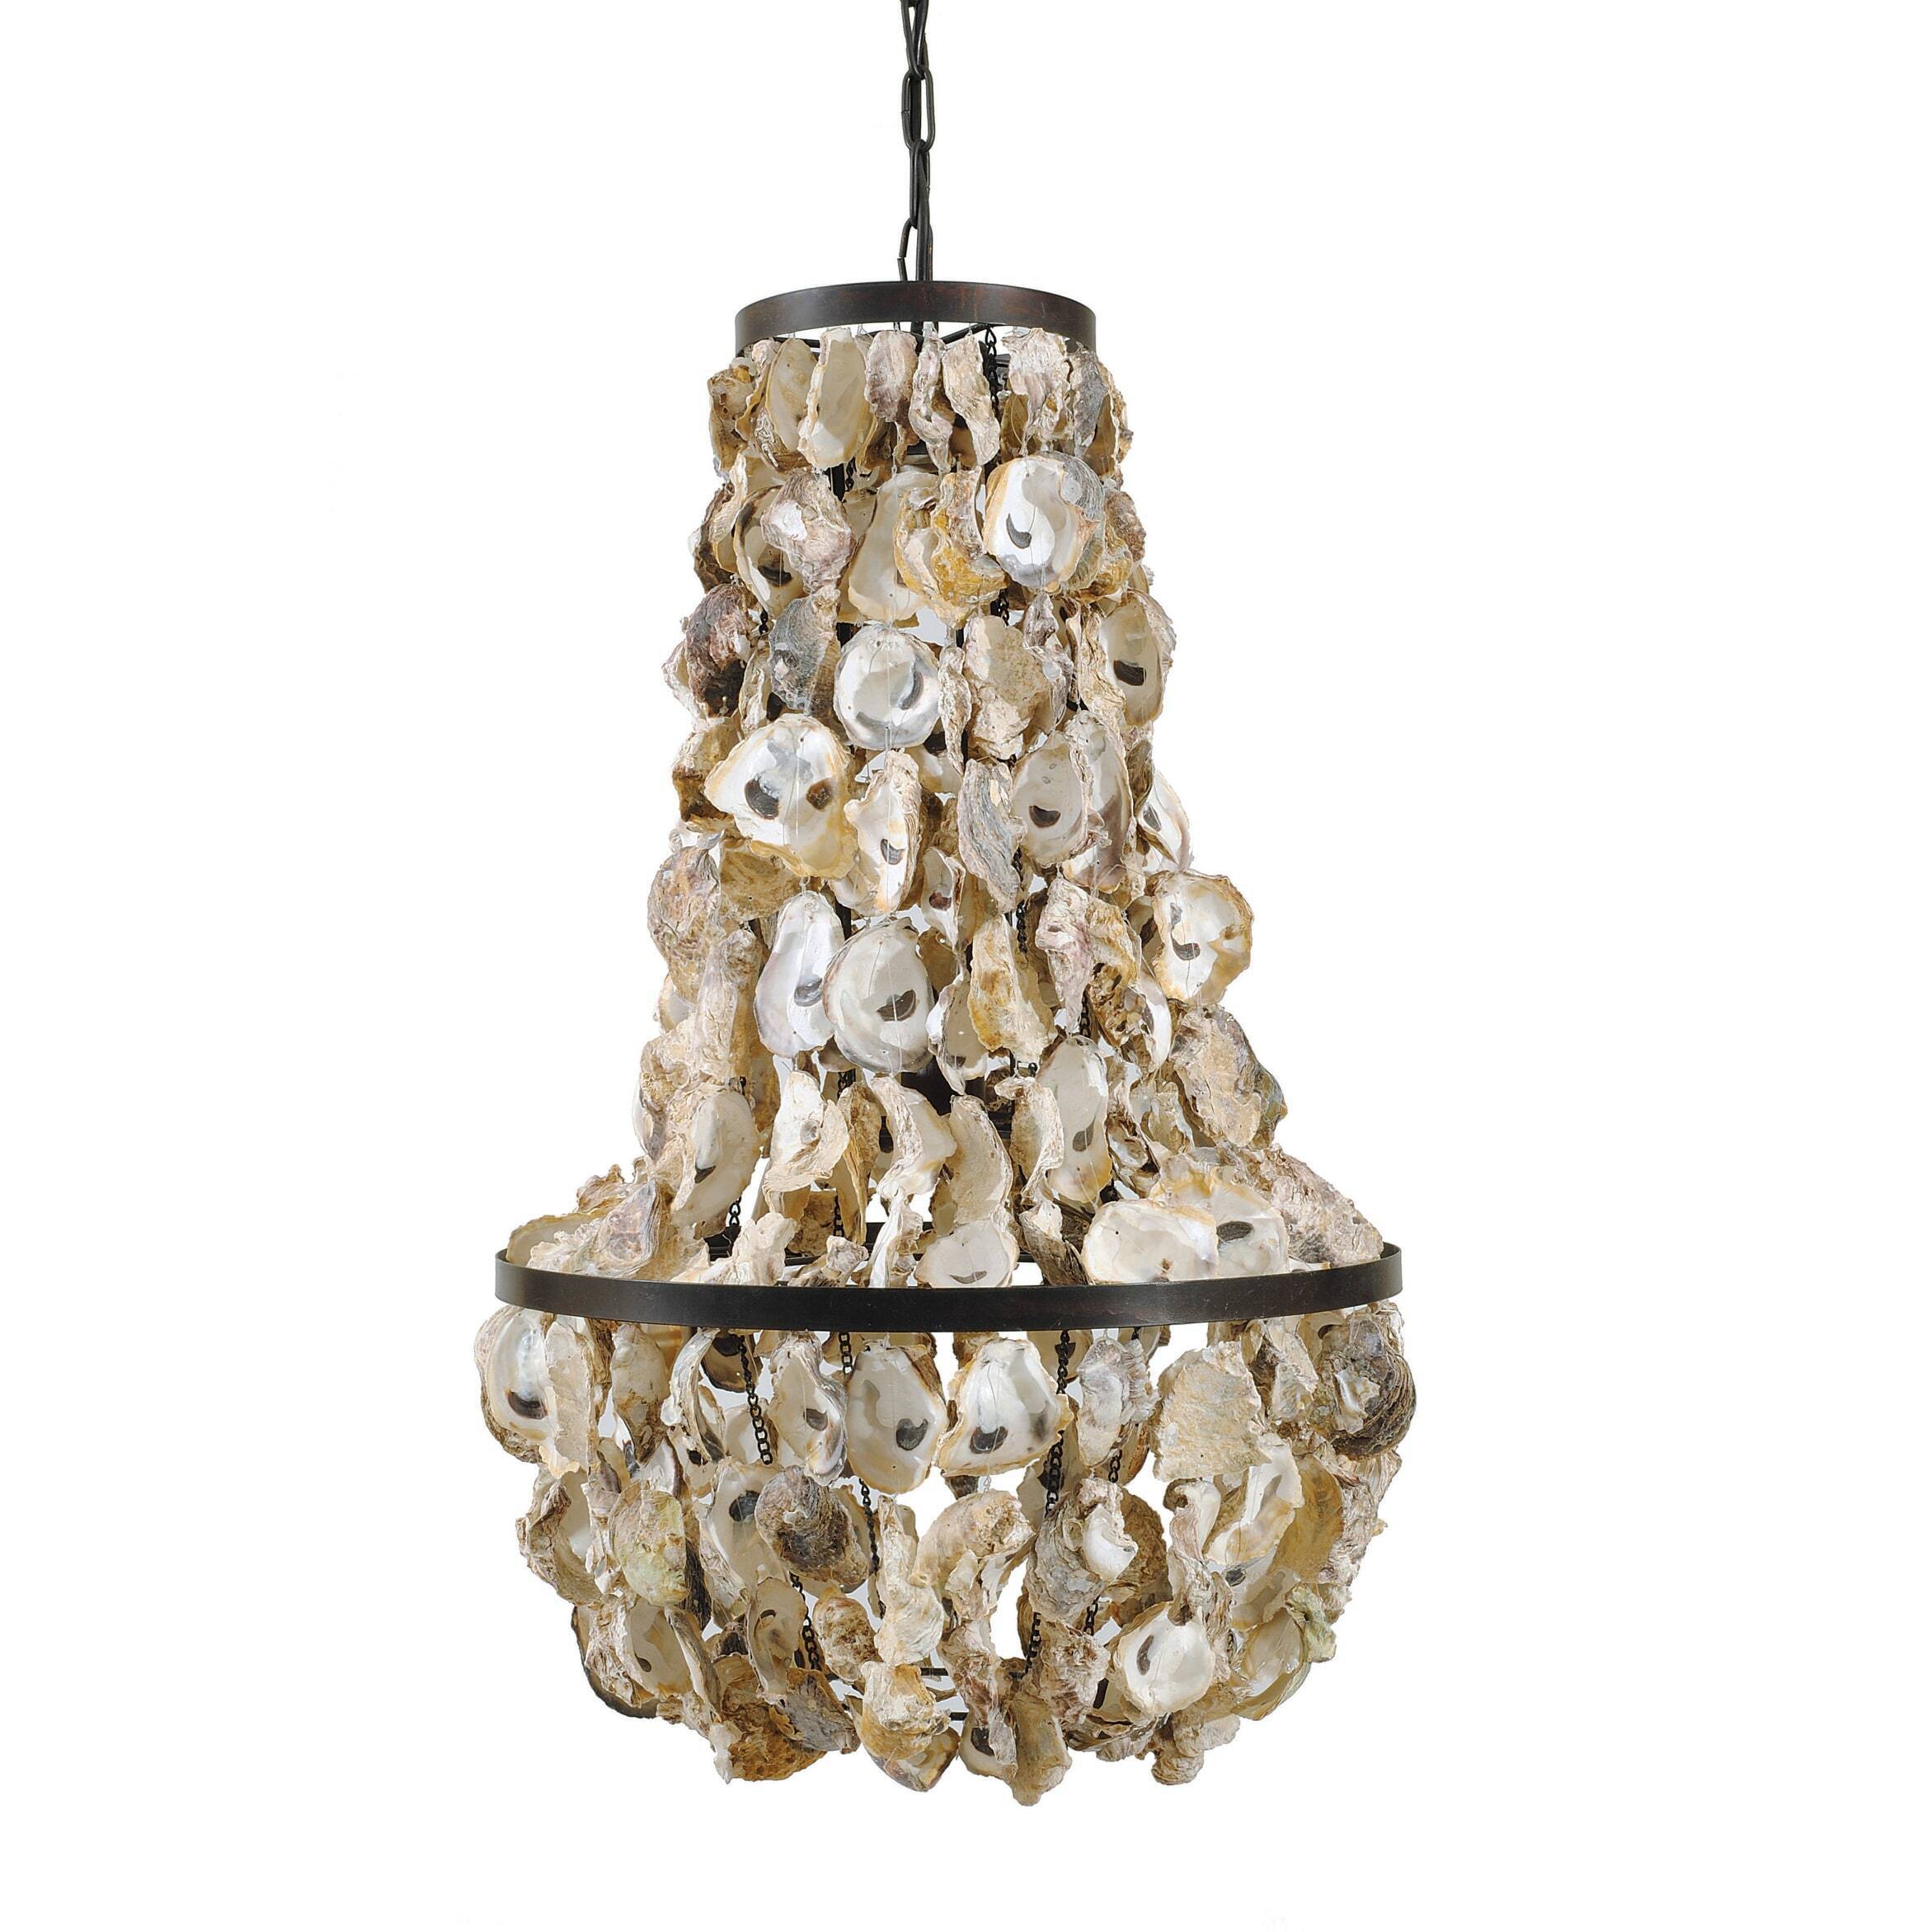 Rustic Oyster Shell Chandelier